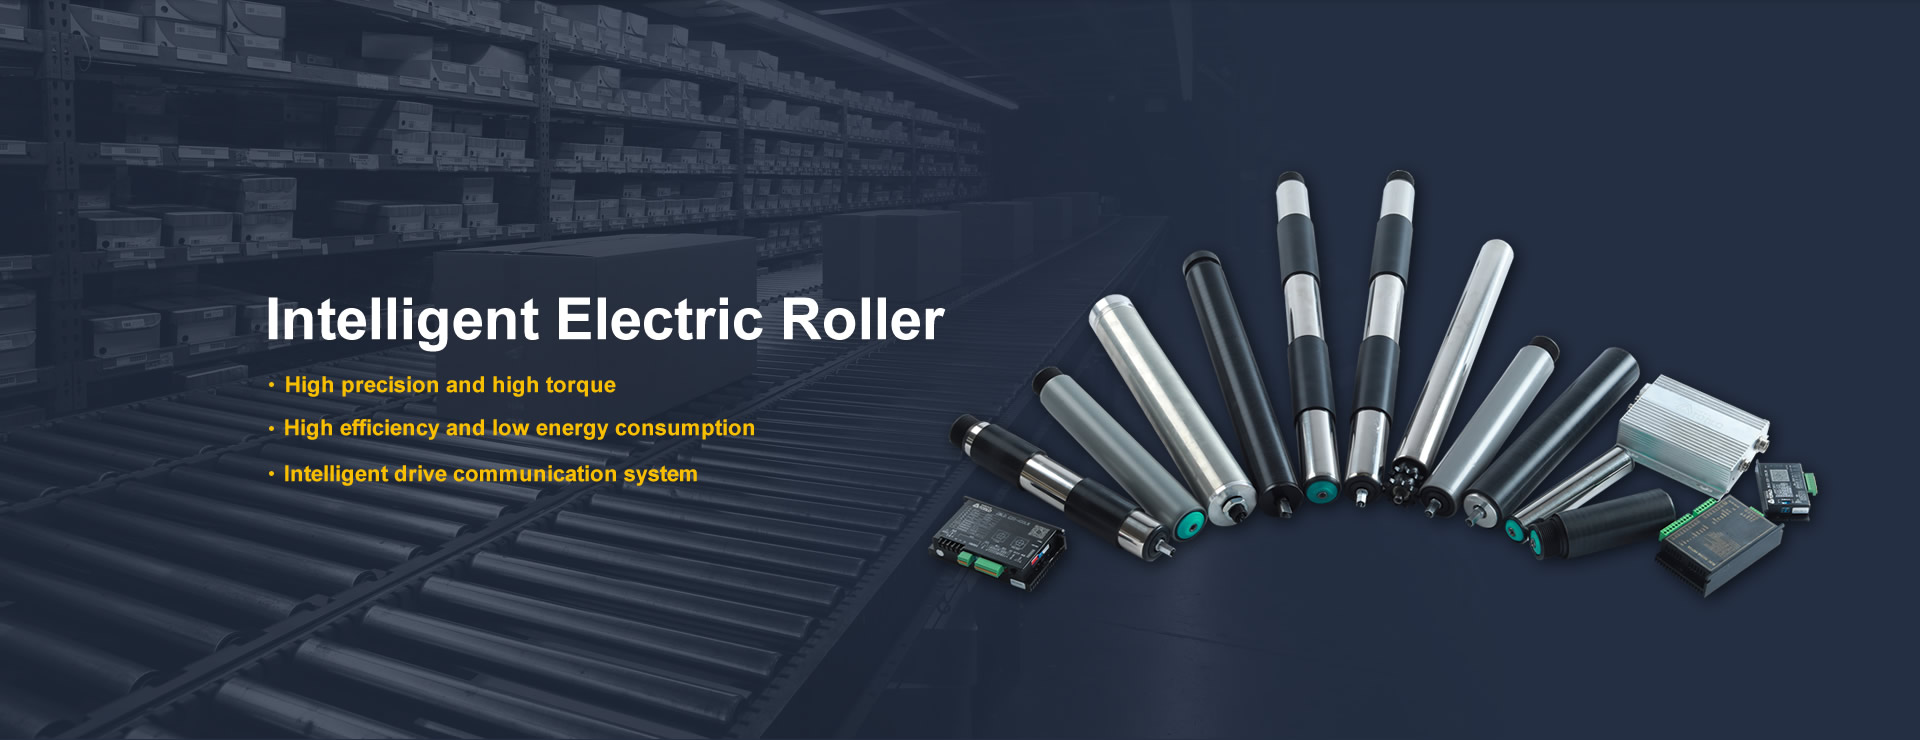 A new generation of intelligent electric rollers